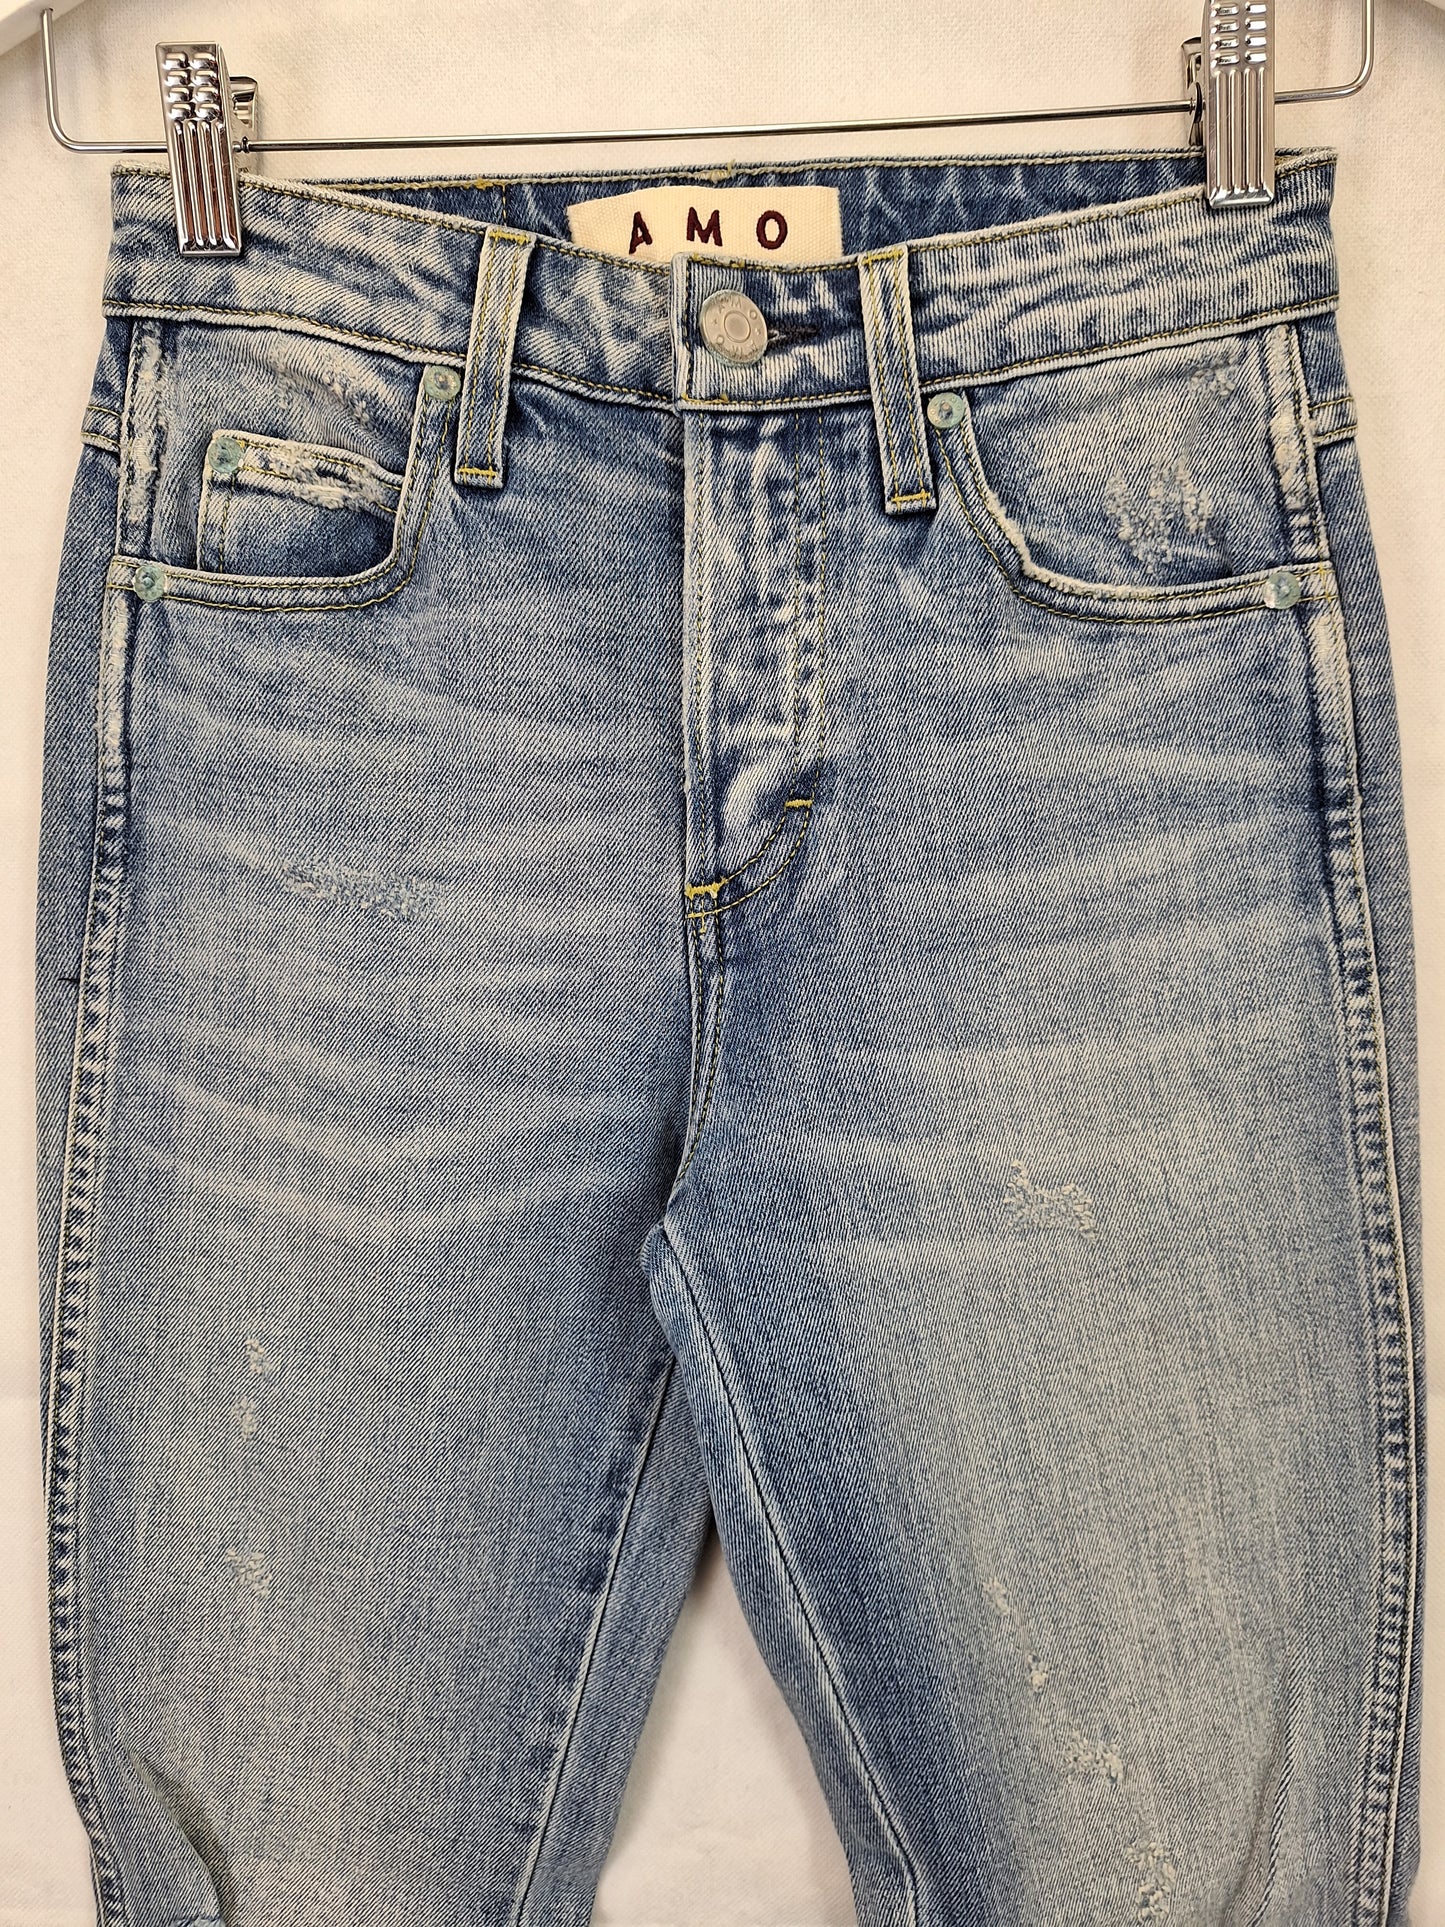 AMO Babe Trippin Distressed Denim Jeans Size 6 by SwapUp-Online Second Hand Store-Online Thrift Store